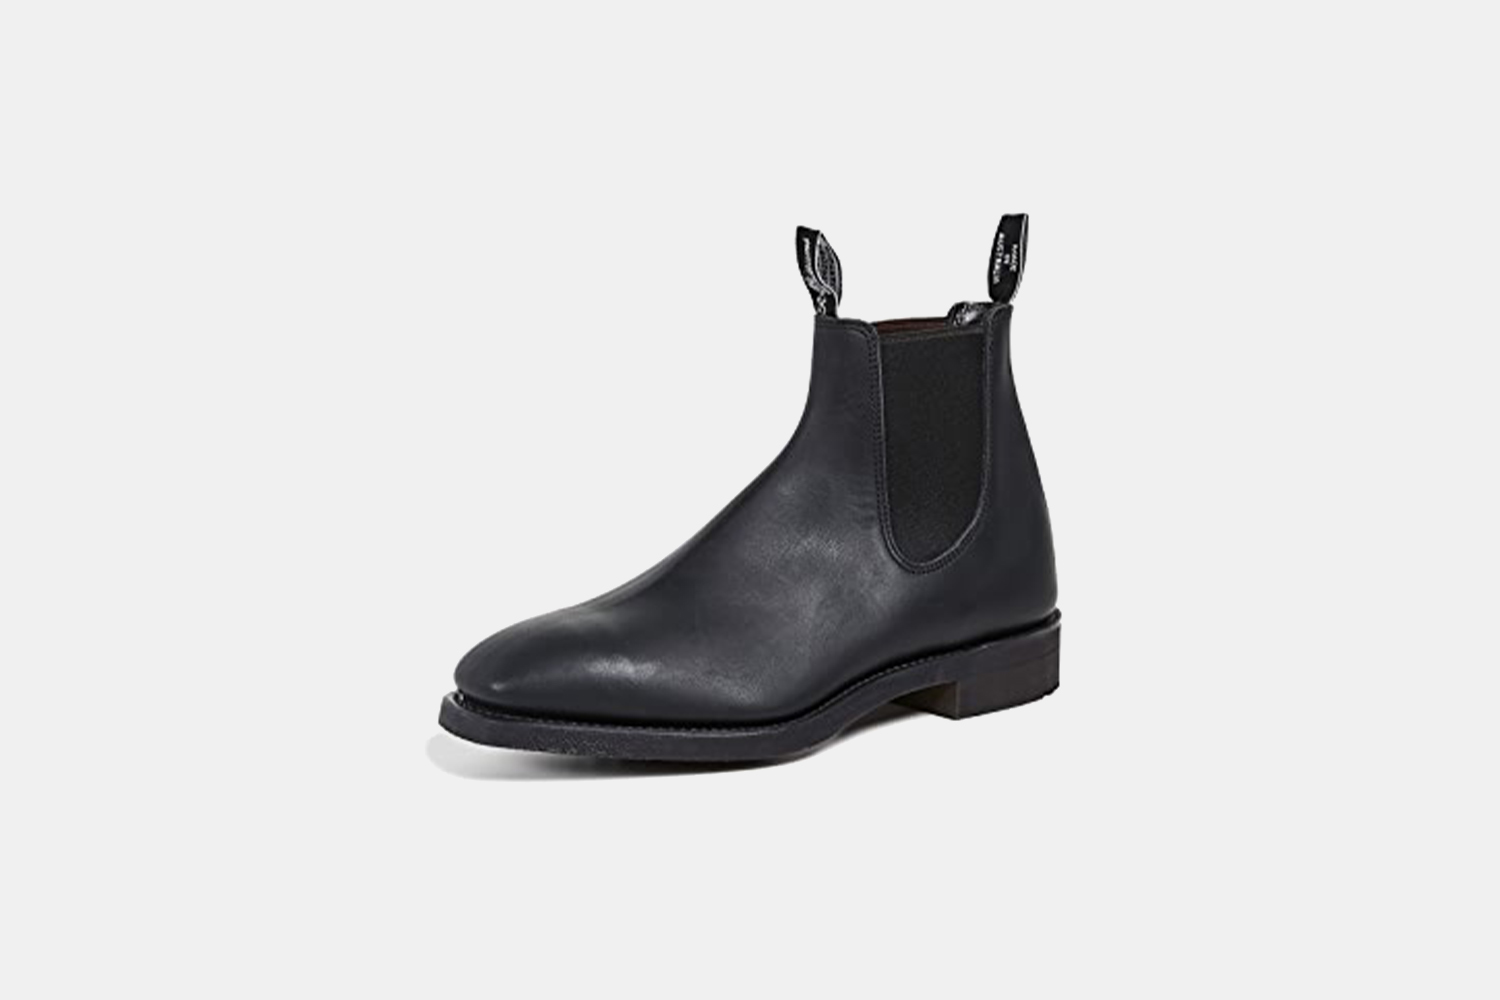 These Already Discounted R.M. Williams Boots Are an Extra 25% Off